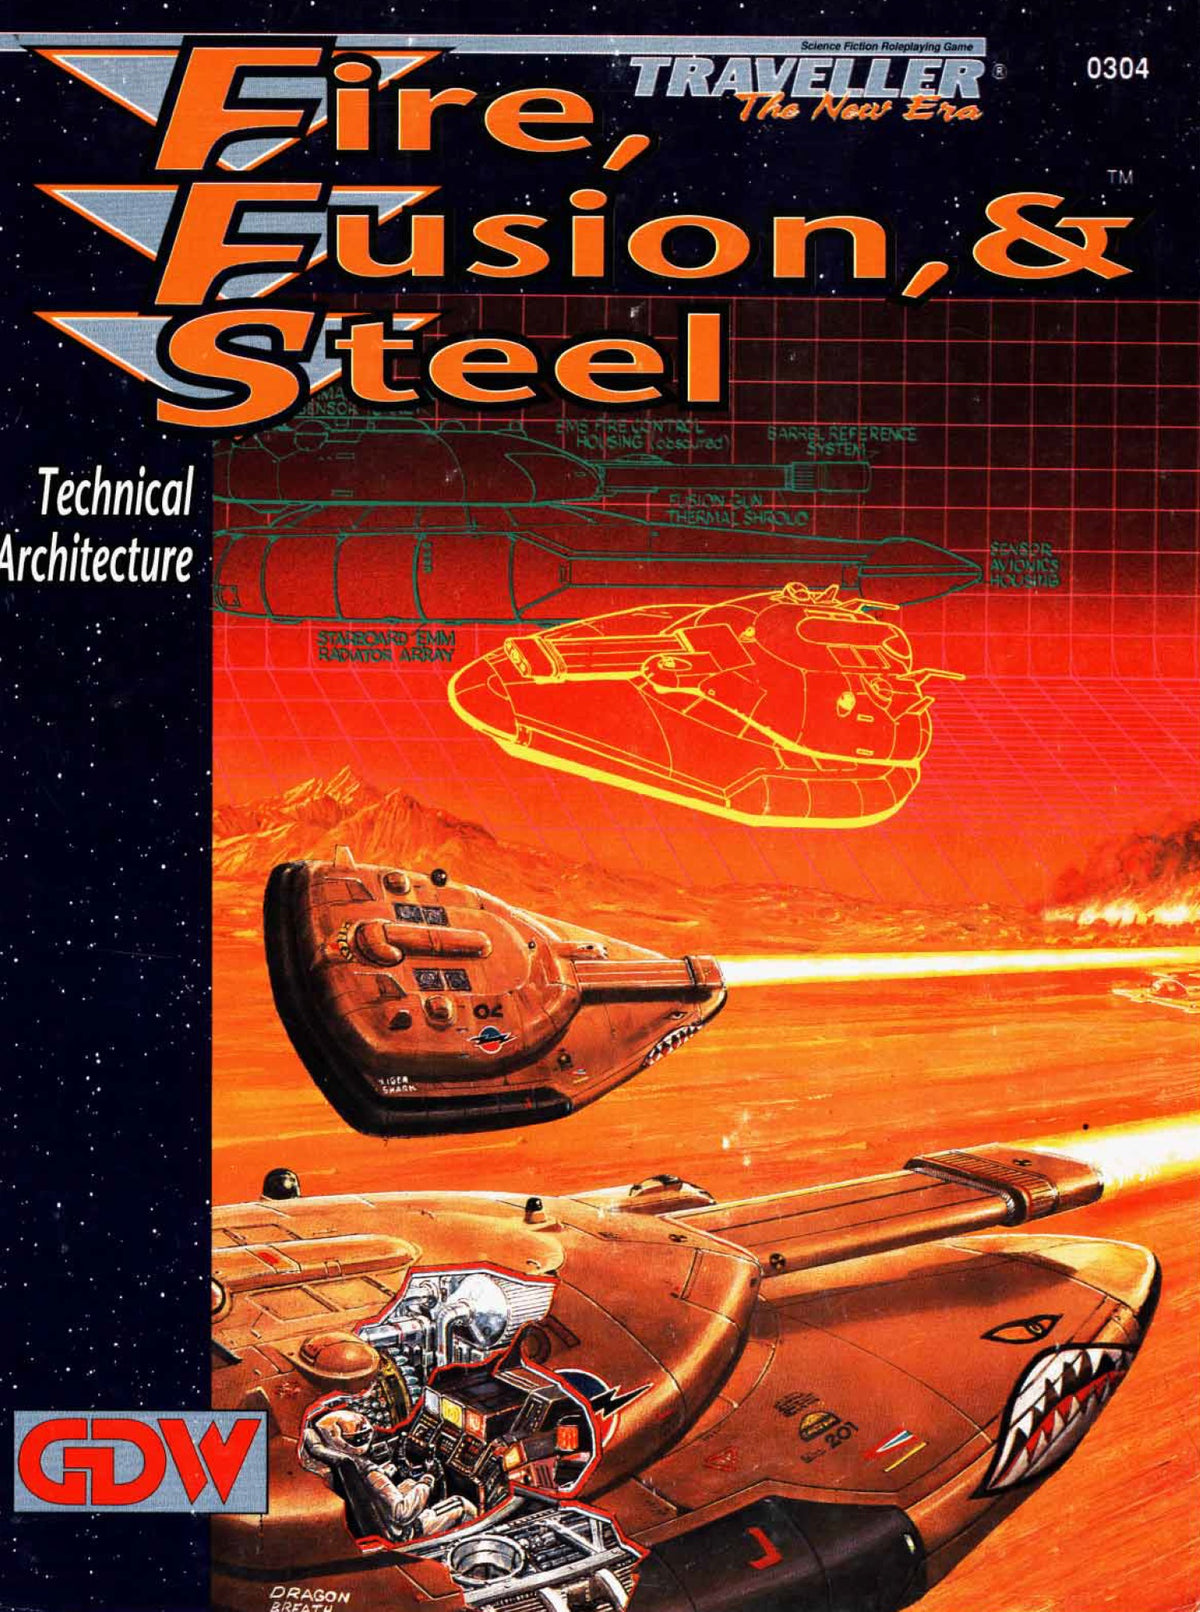 Fire, Fusion and Steel ebook